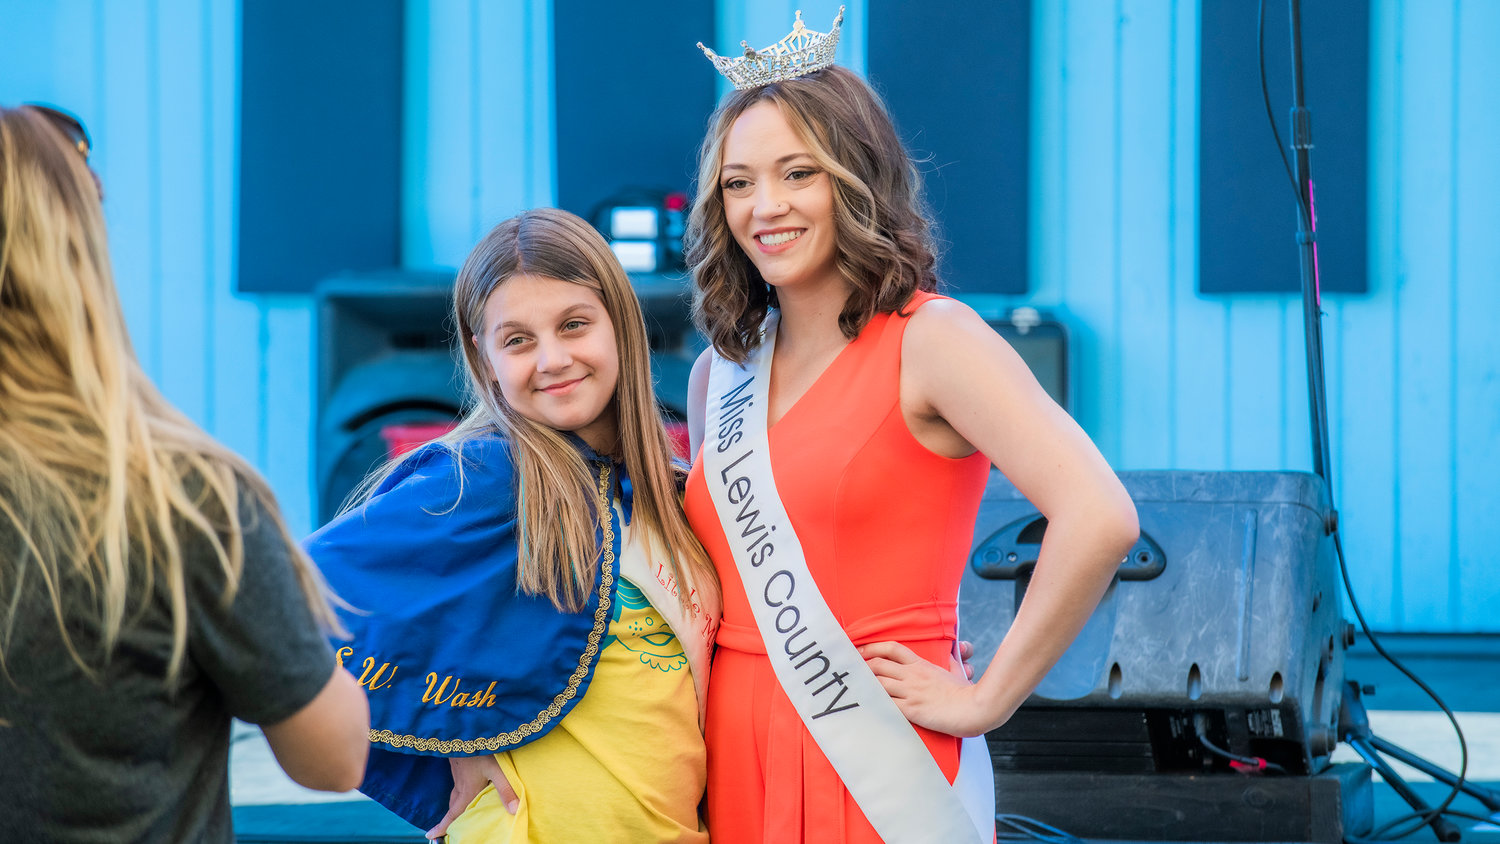 Little Miss Friendly 2021 MaKayla Maynard and Miss Lewis County Briana Rasku smile for a photo Tueasday at the Southwest Washington Fairgrounds in Centralia.